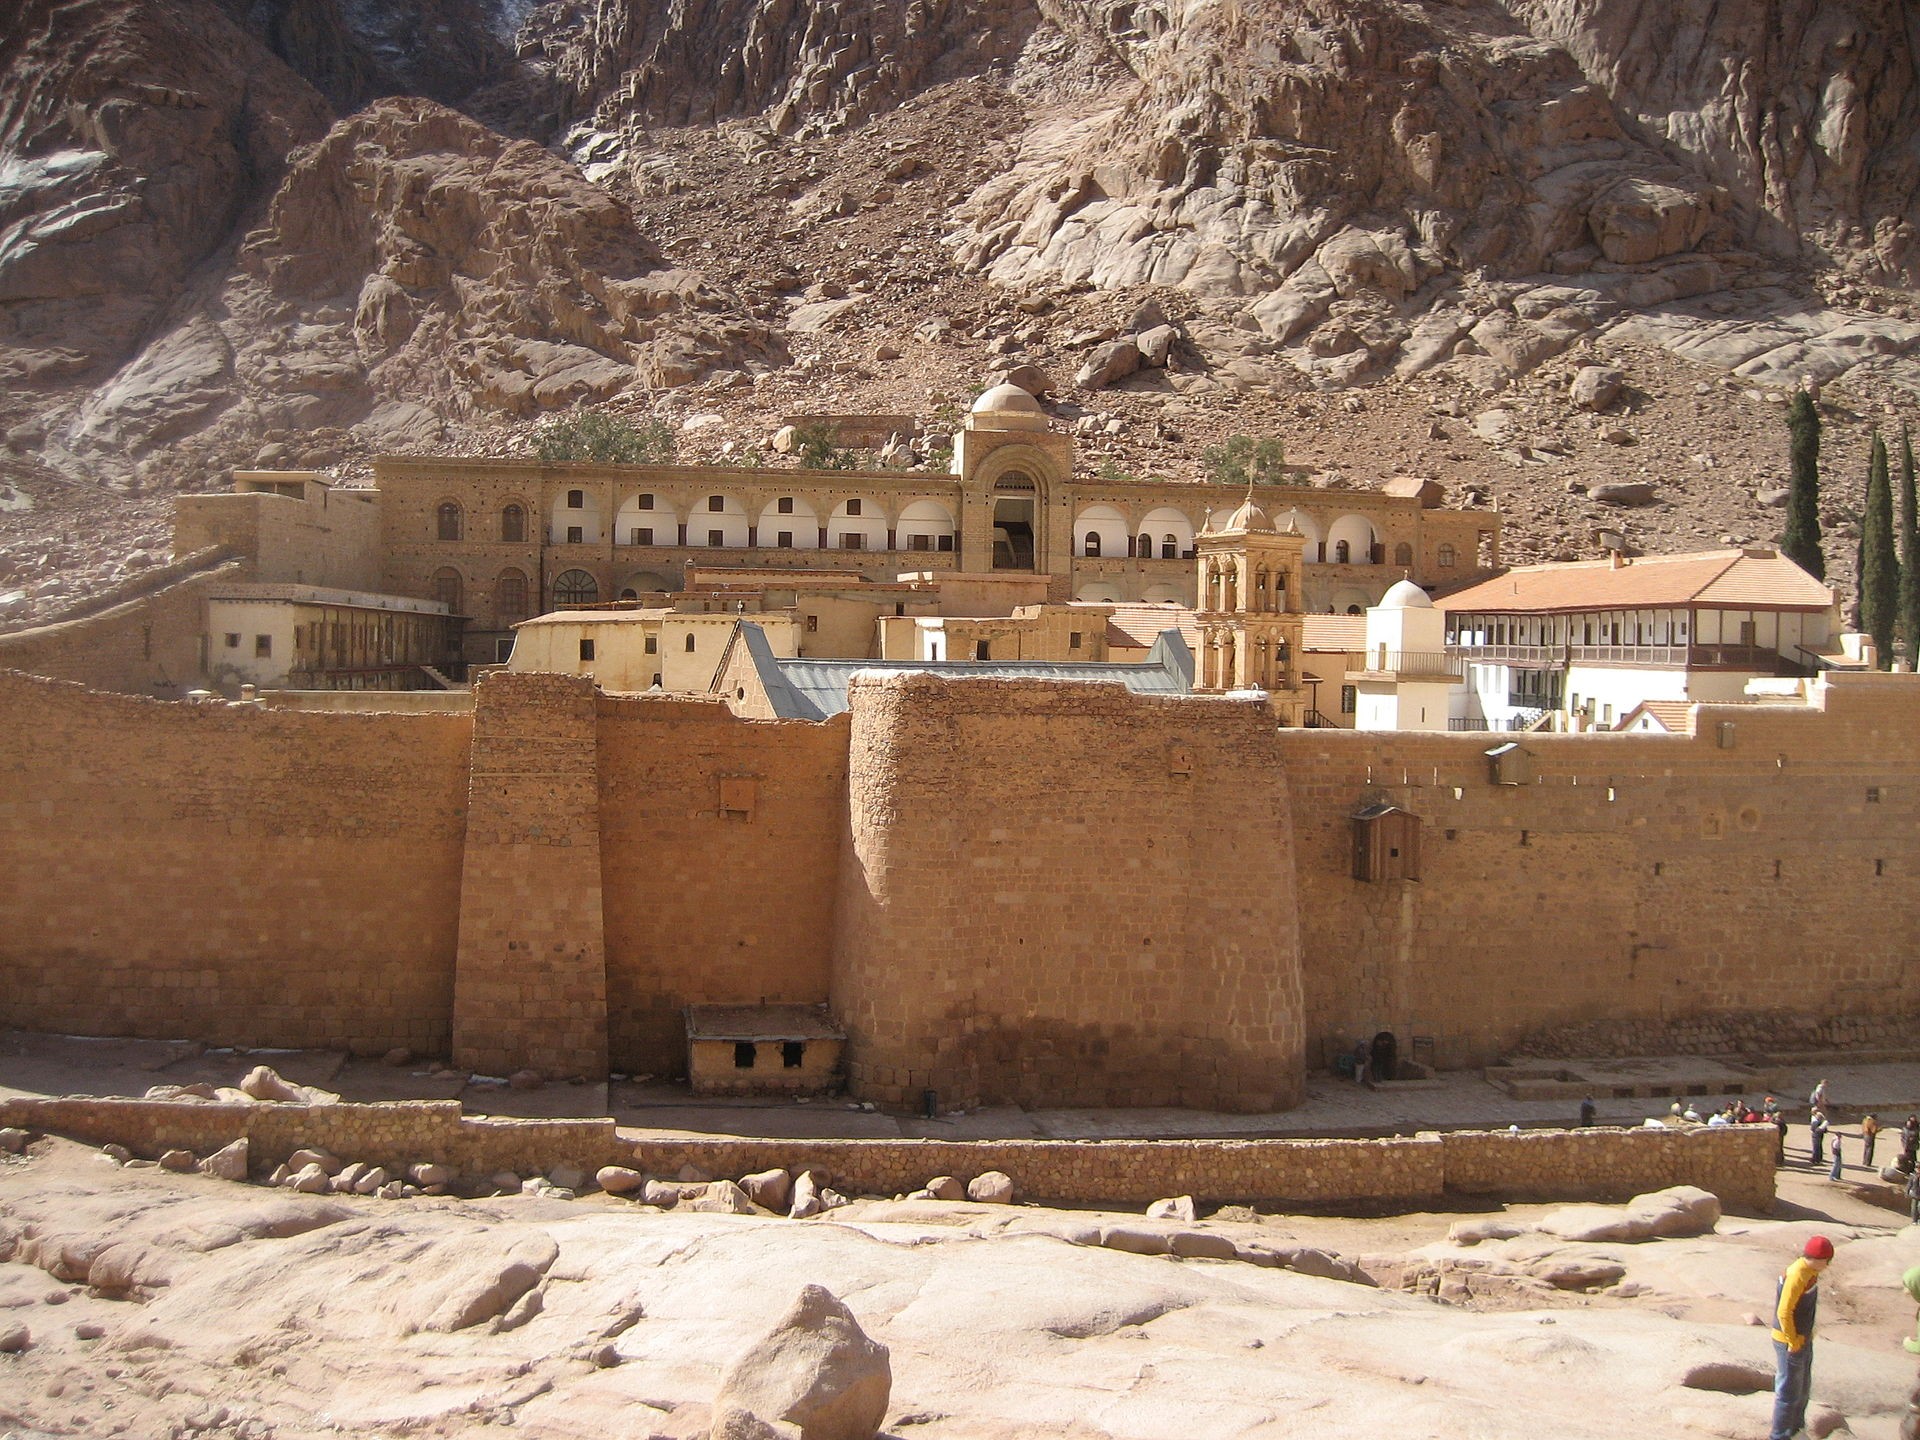 Monastery of st Catherine tour from Sharm el Sheikh Port